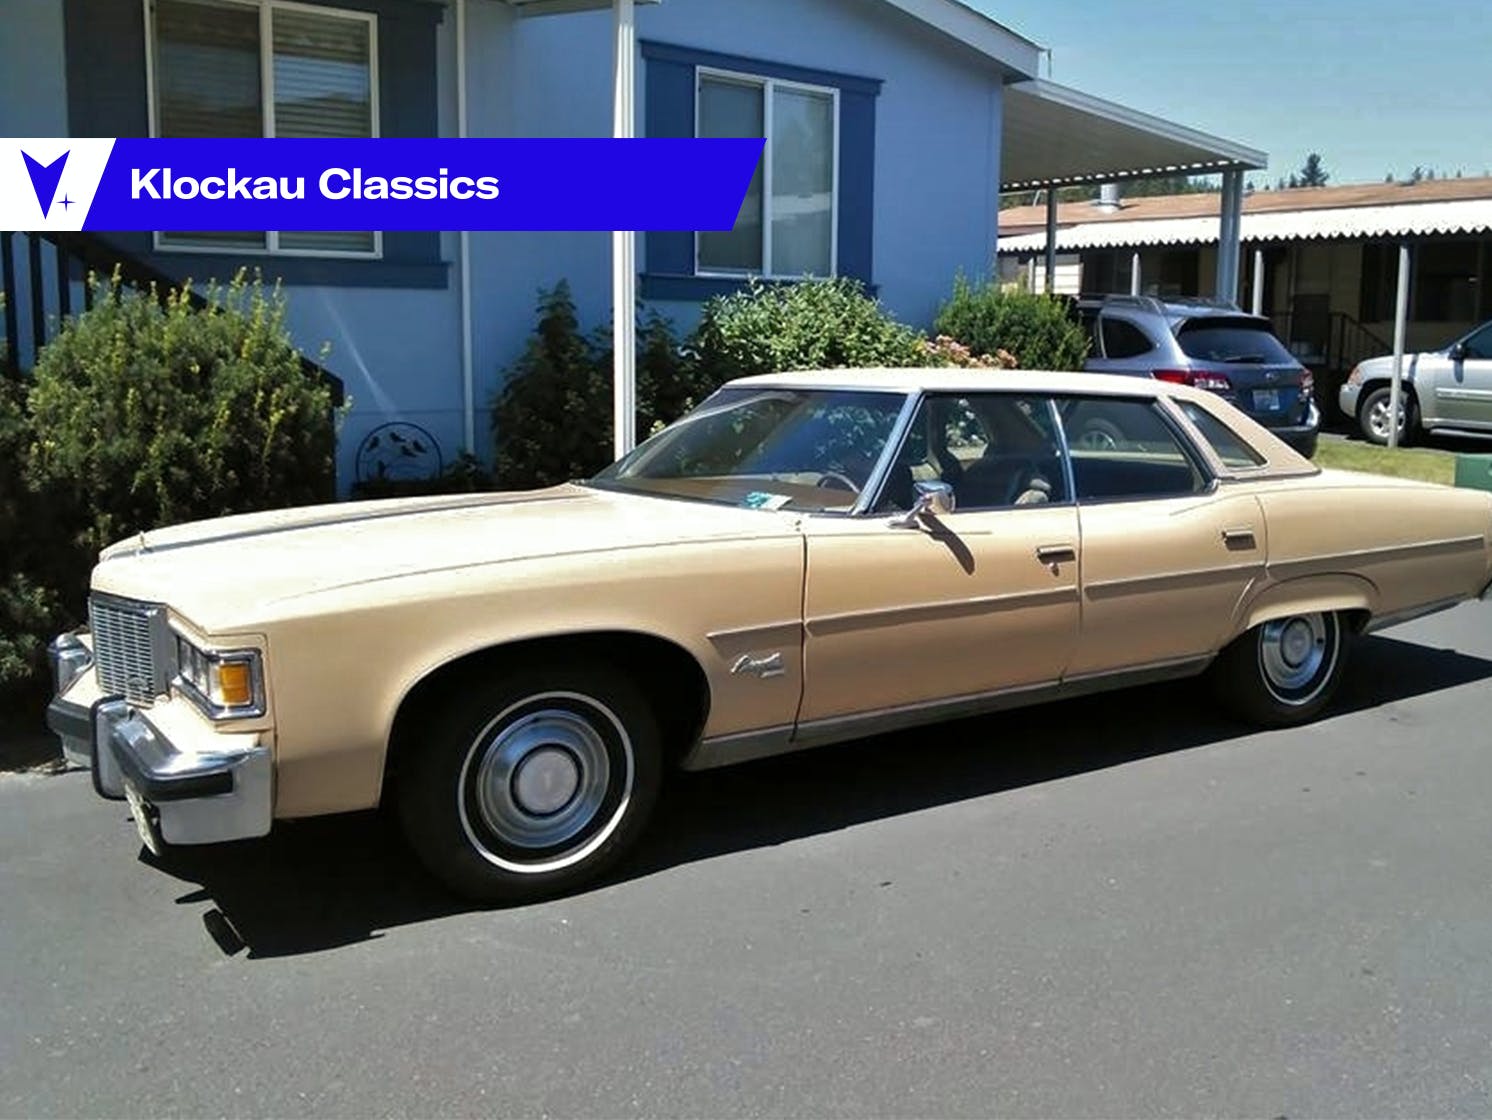 1976 Pontiac Bonneville Brougham: Last call for truly large luxury -  Hagerty Media